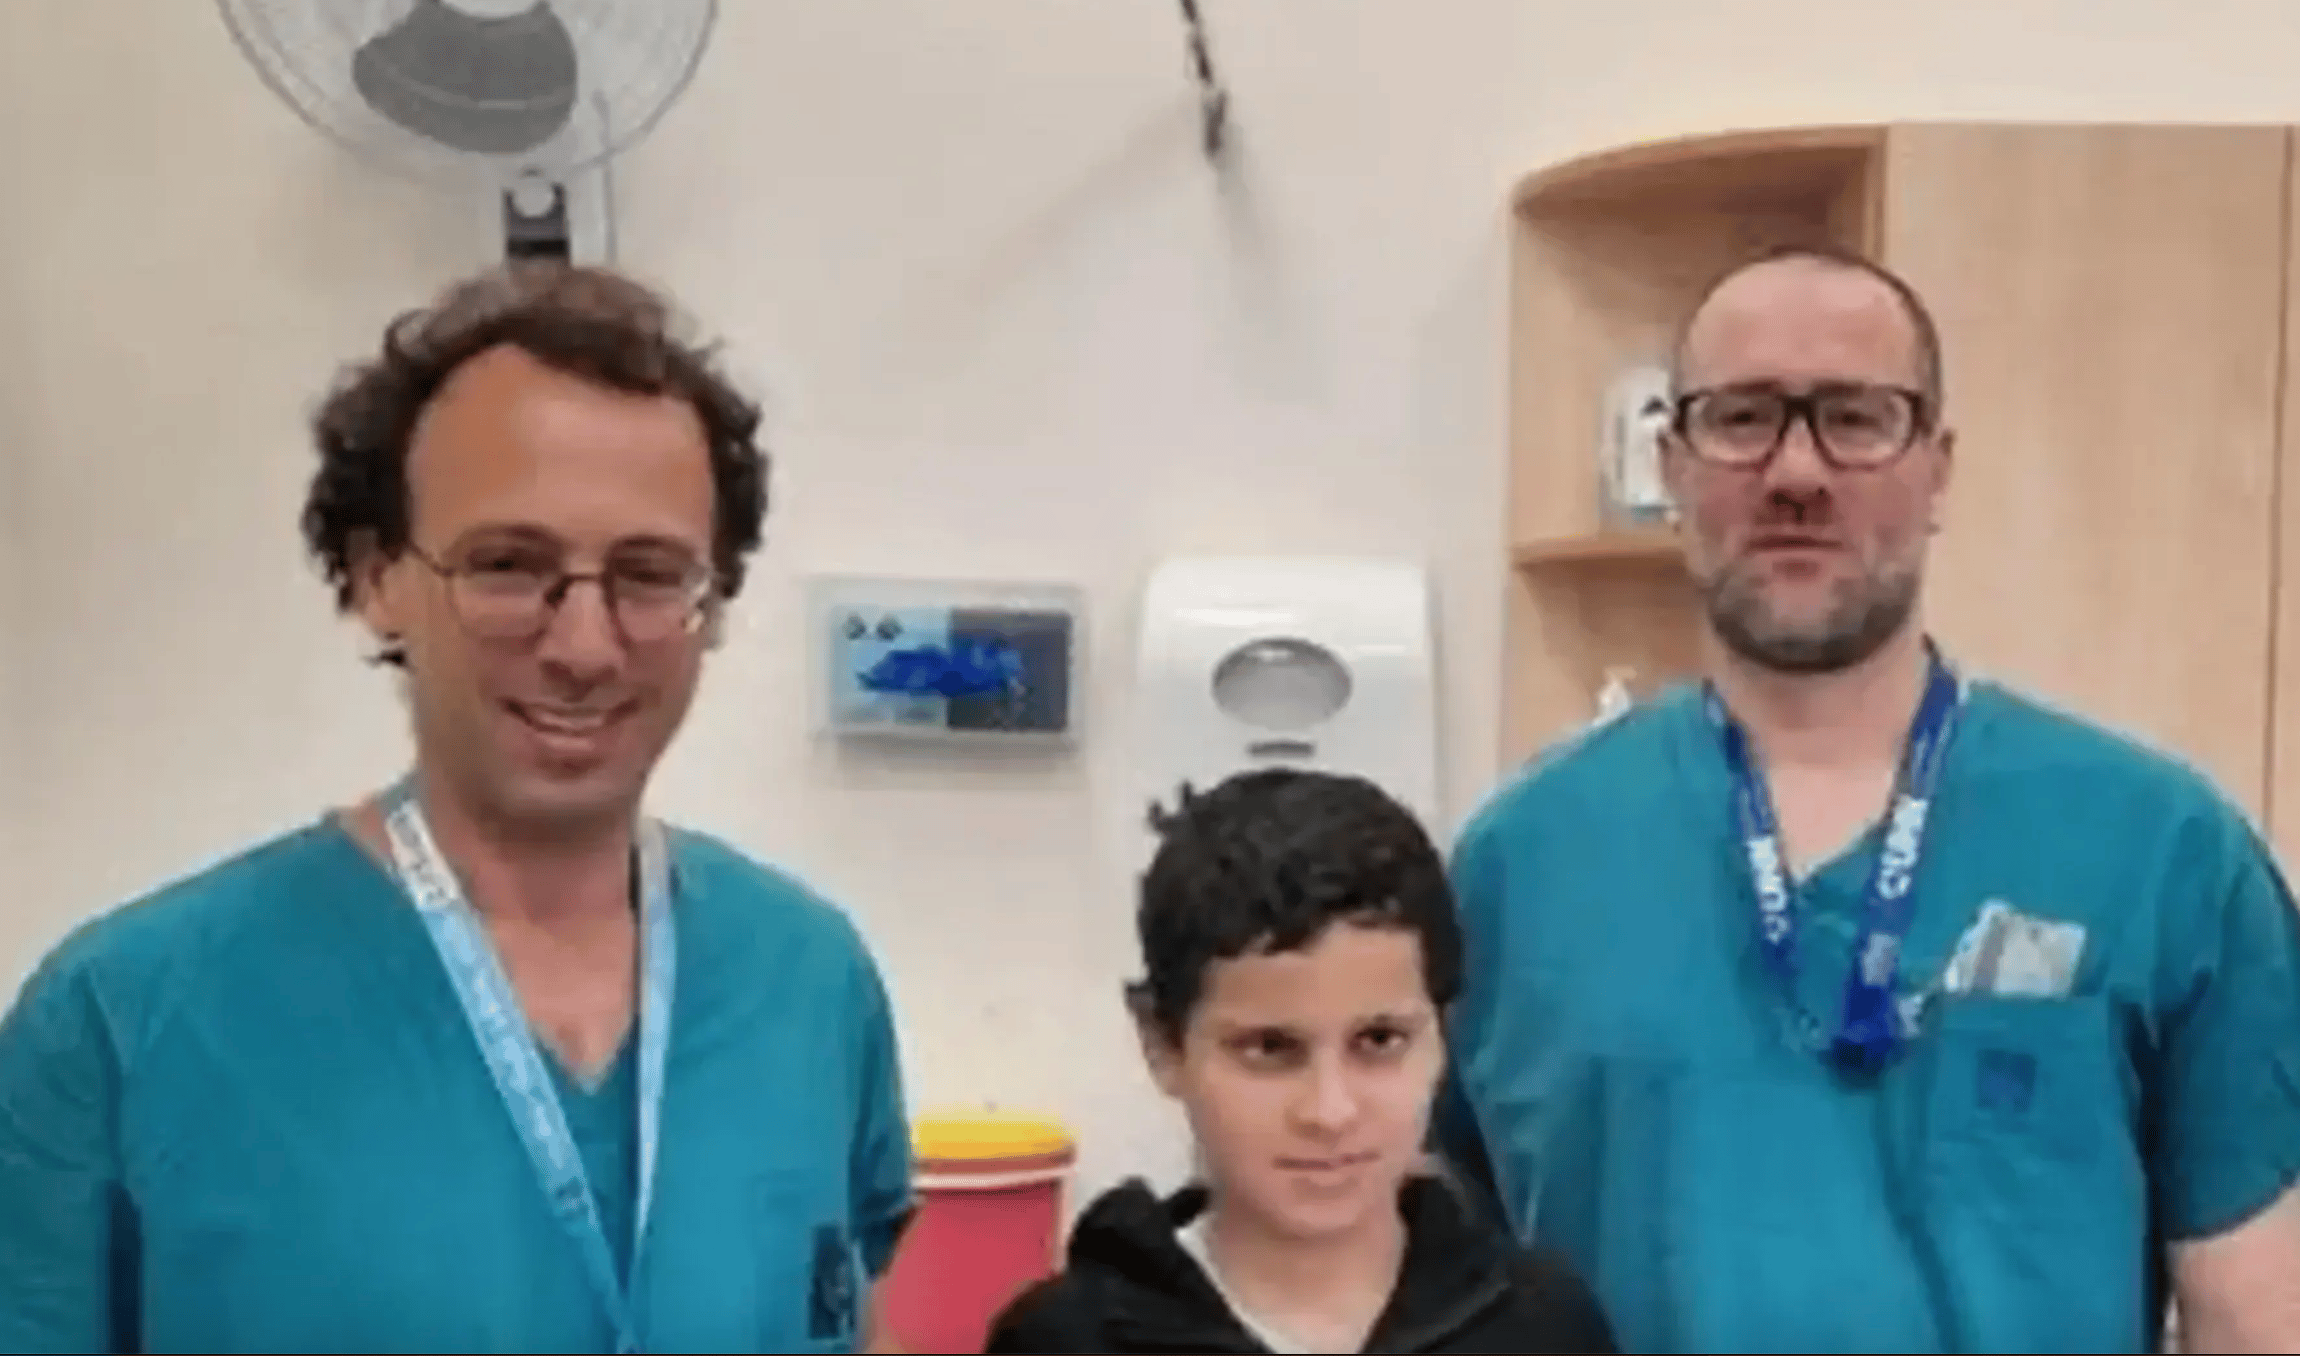 Doctors Successfully Reattach Boy’s Head After Car Accident In Groundbreaking Surgery